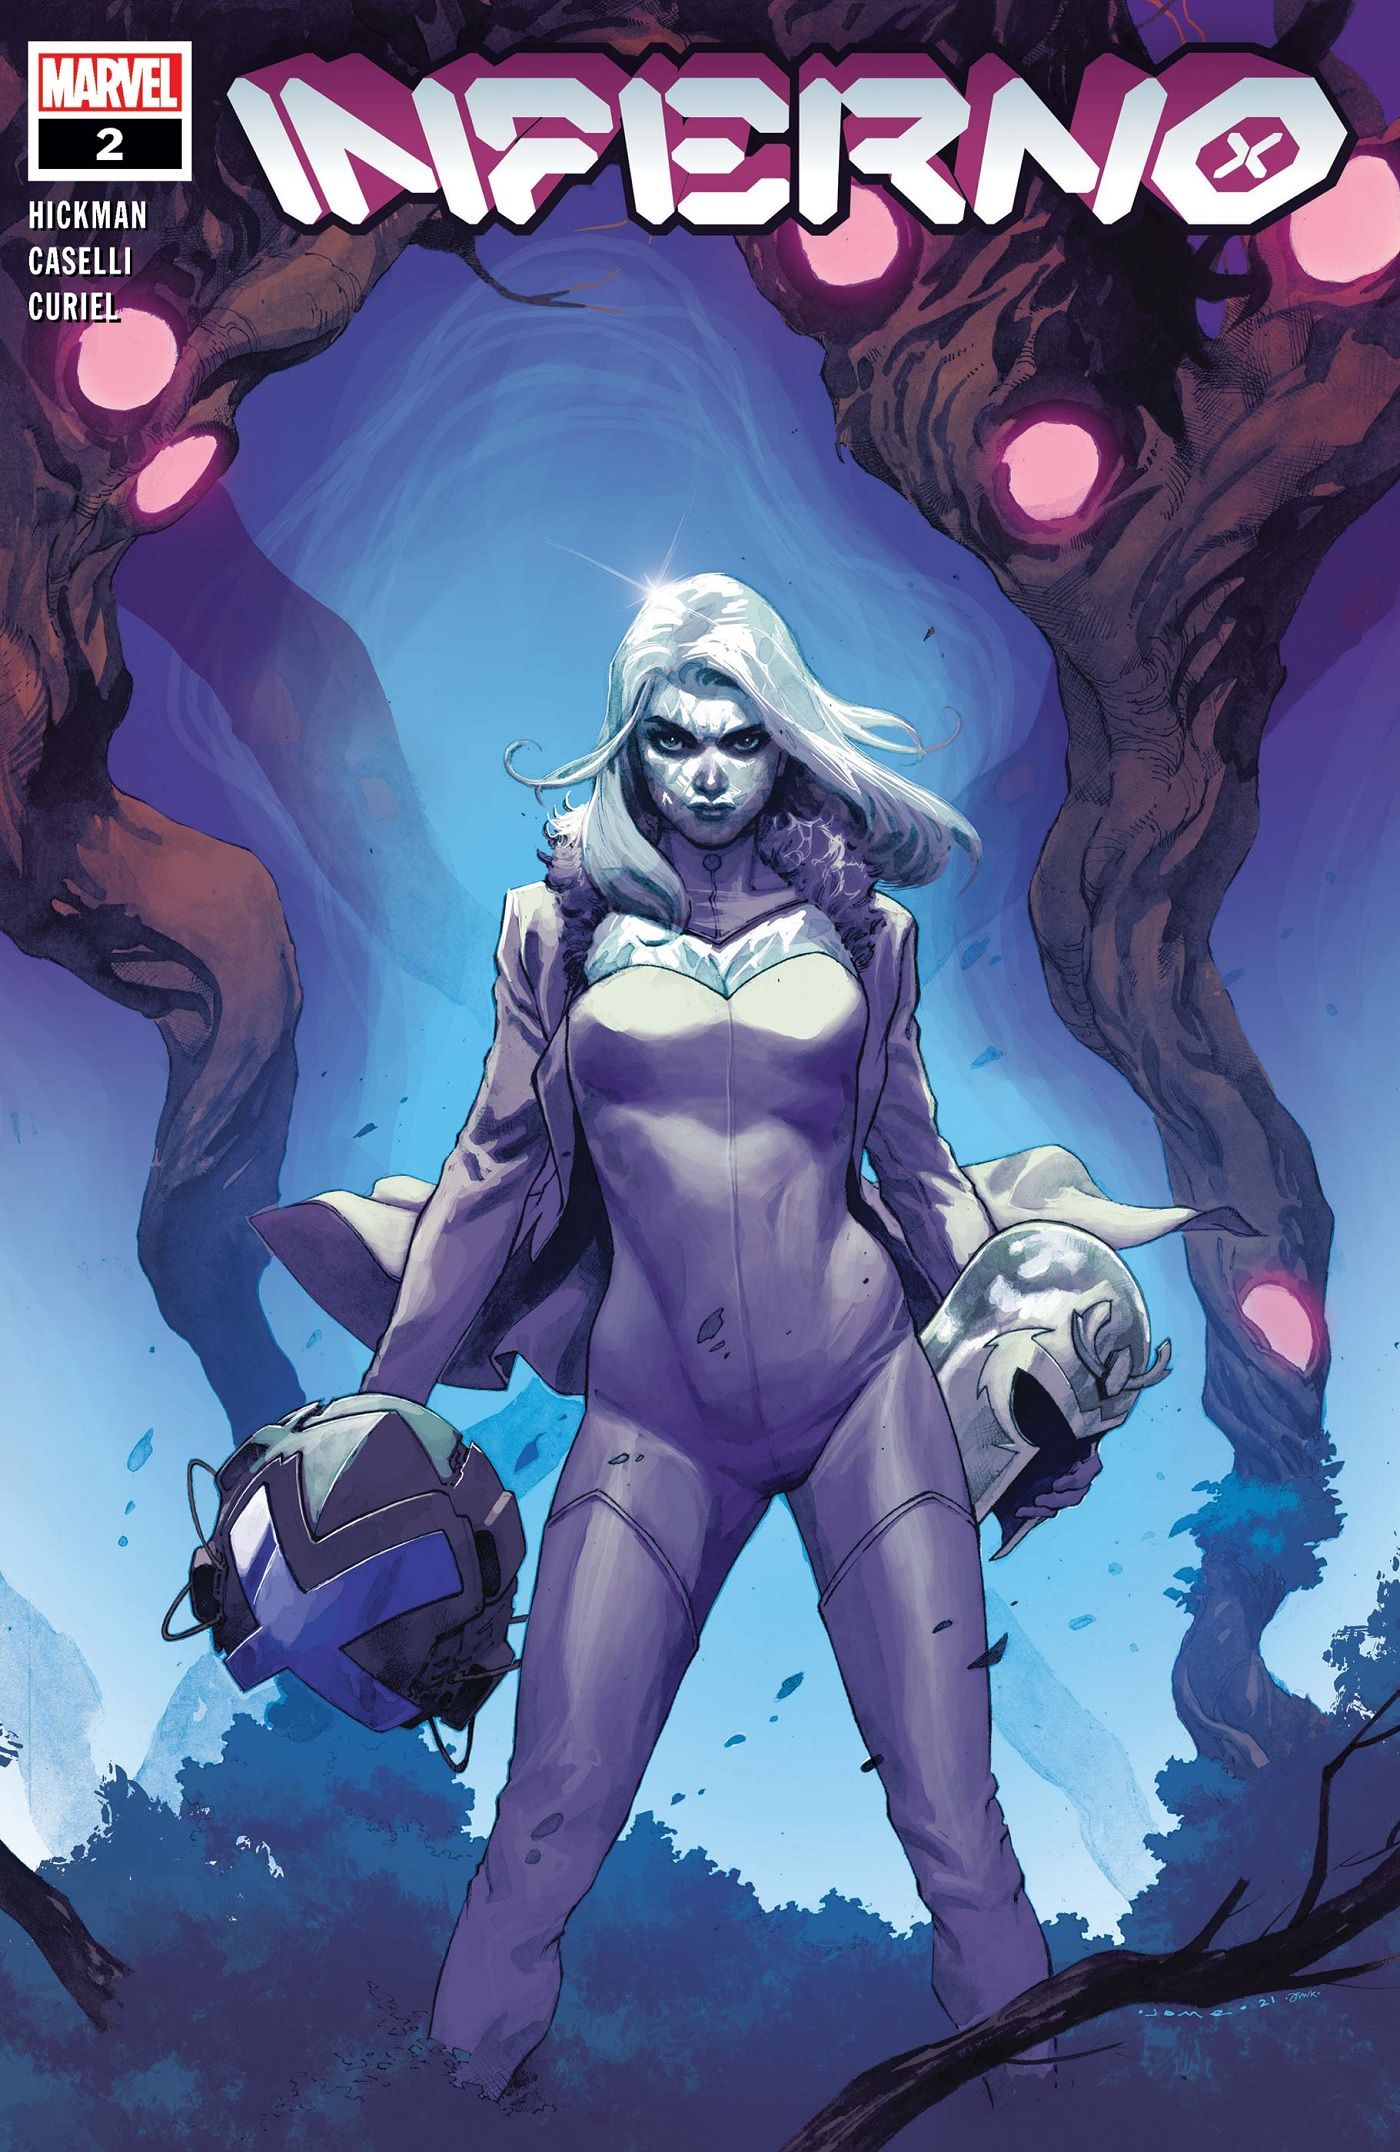 Emma Frost on the cover to X-Men Inferno 2 by Jerome Opena